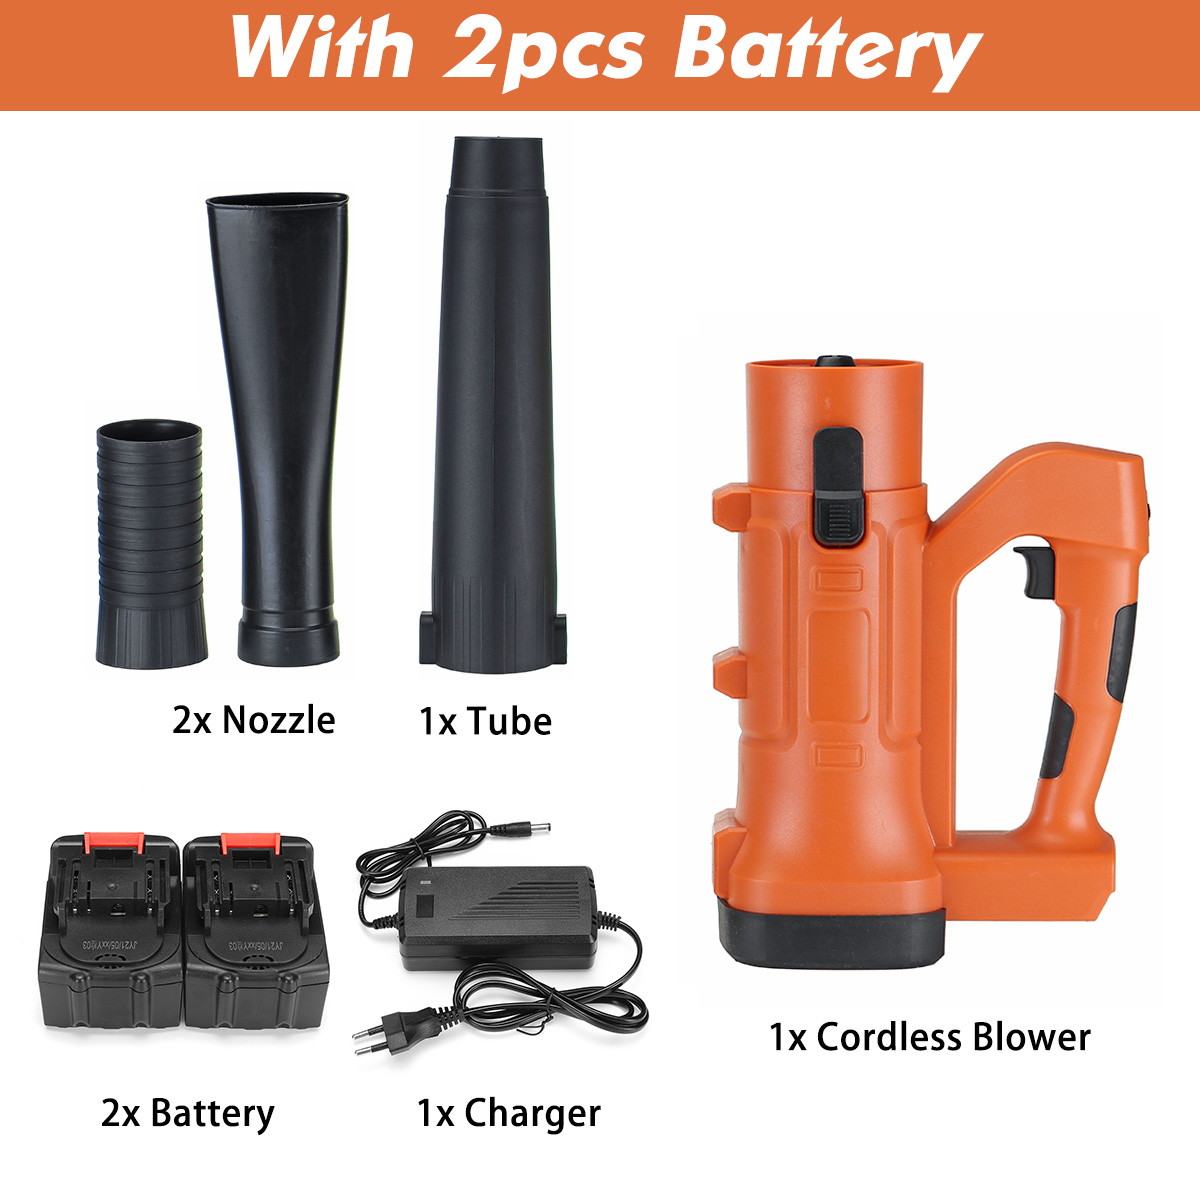 Wolike-2500W-388VF-Cordless-Electric-Air-Blower-Handheld-Leaf-Blower-Dust-Collector-Sweeper-Garden-T-1931058-14